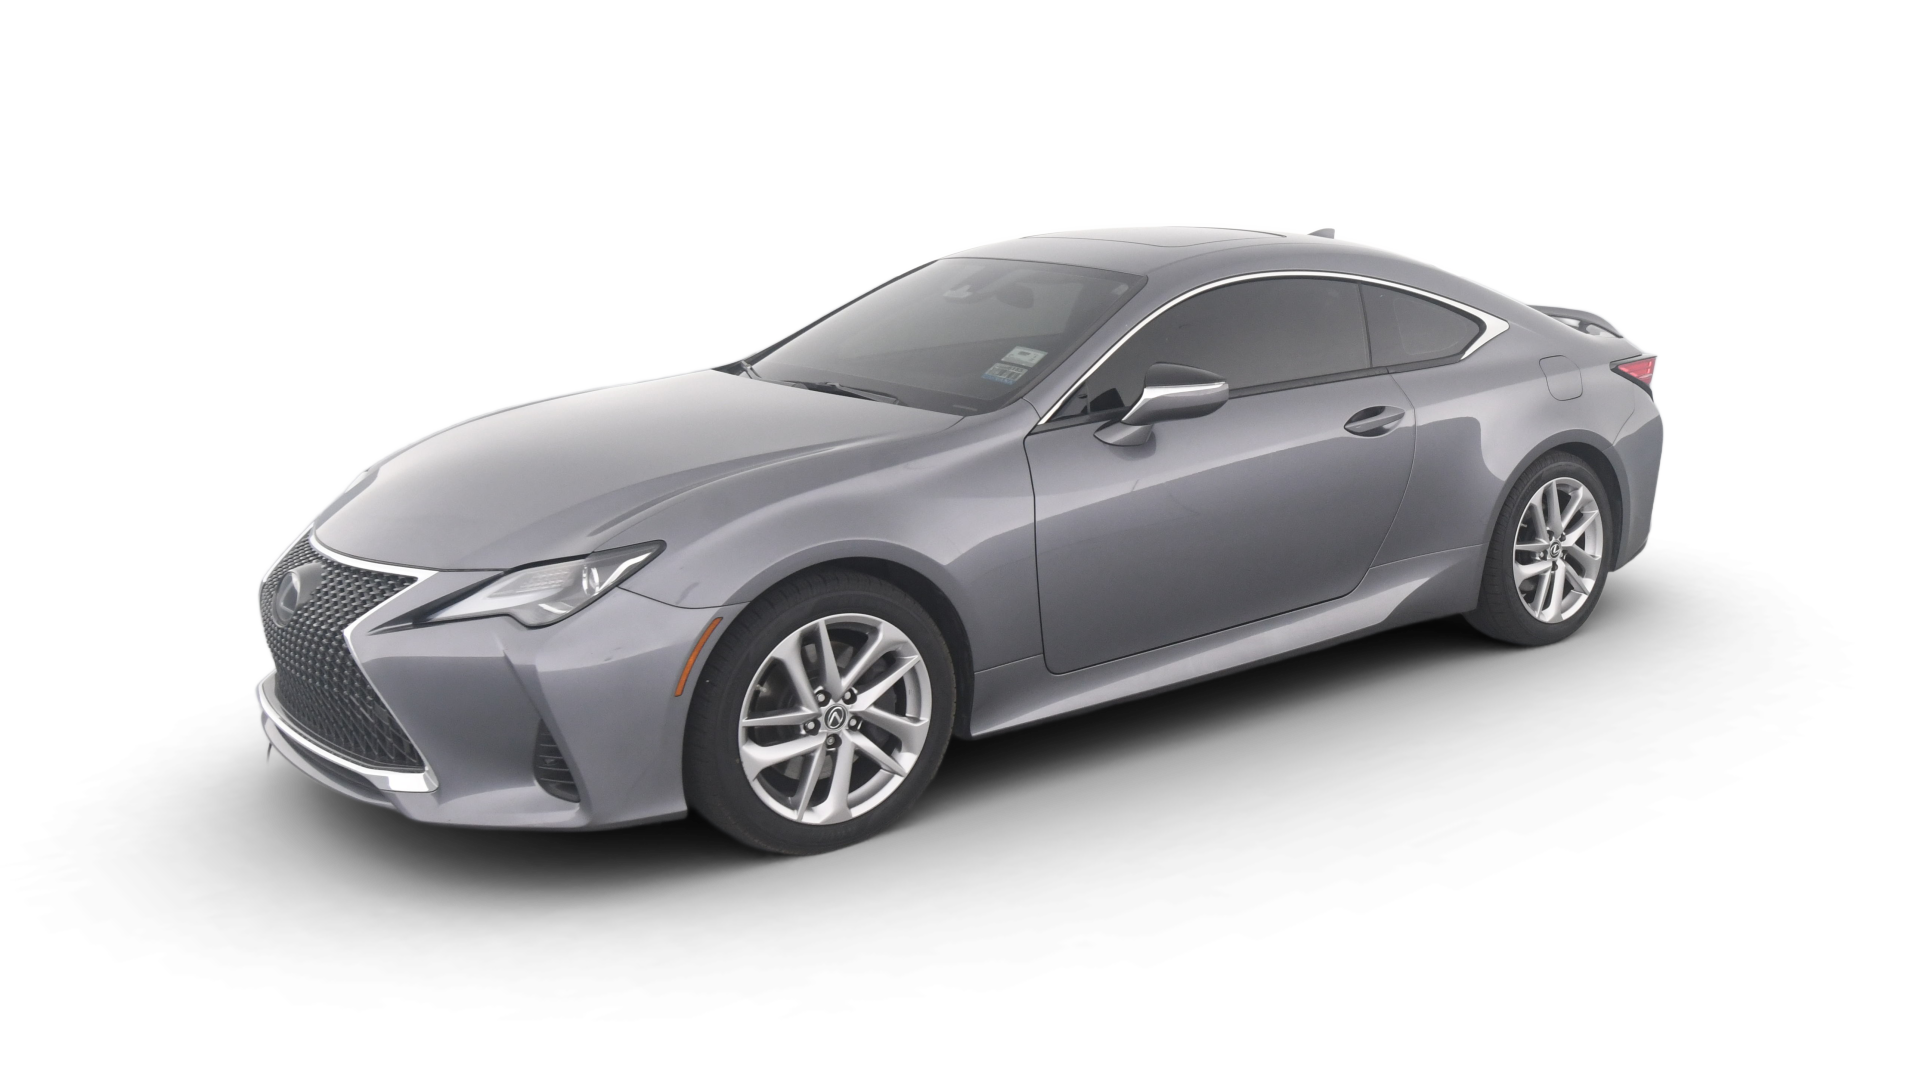 Used Lexus RC For Sale Online | Carvana